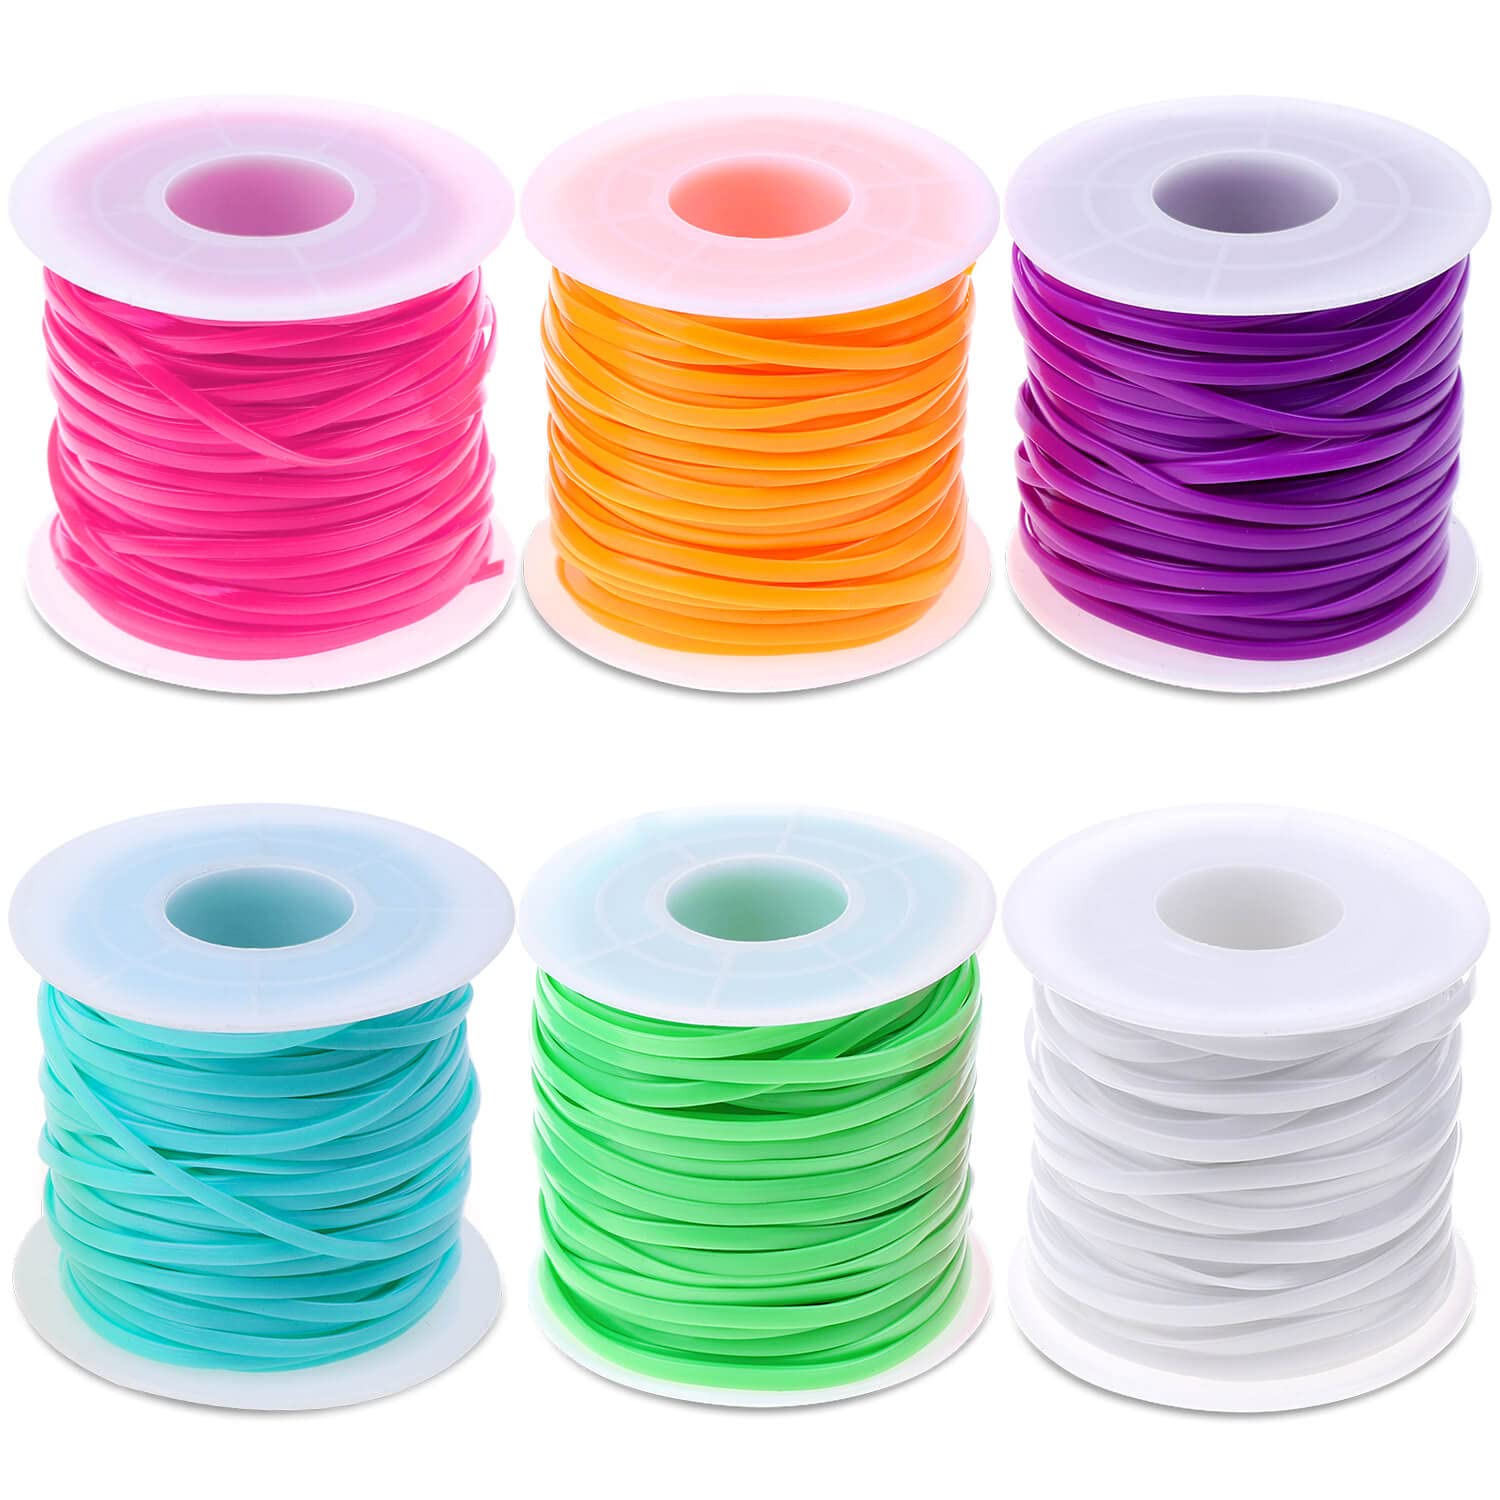 10 Plastic Lacing String Cord for DIY Craft, 10 Colors, 2.5 x 1mm